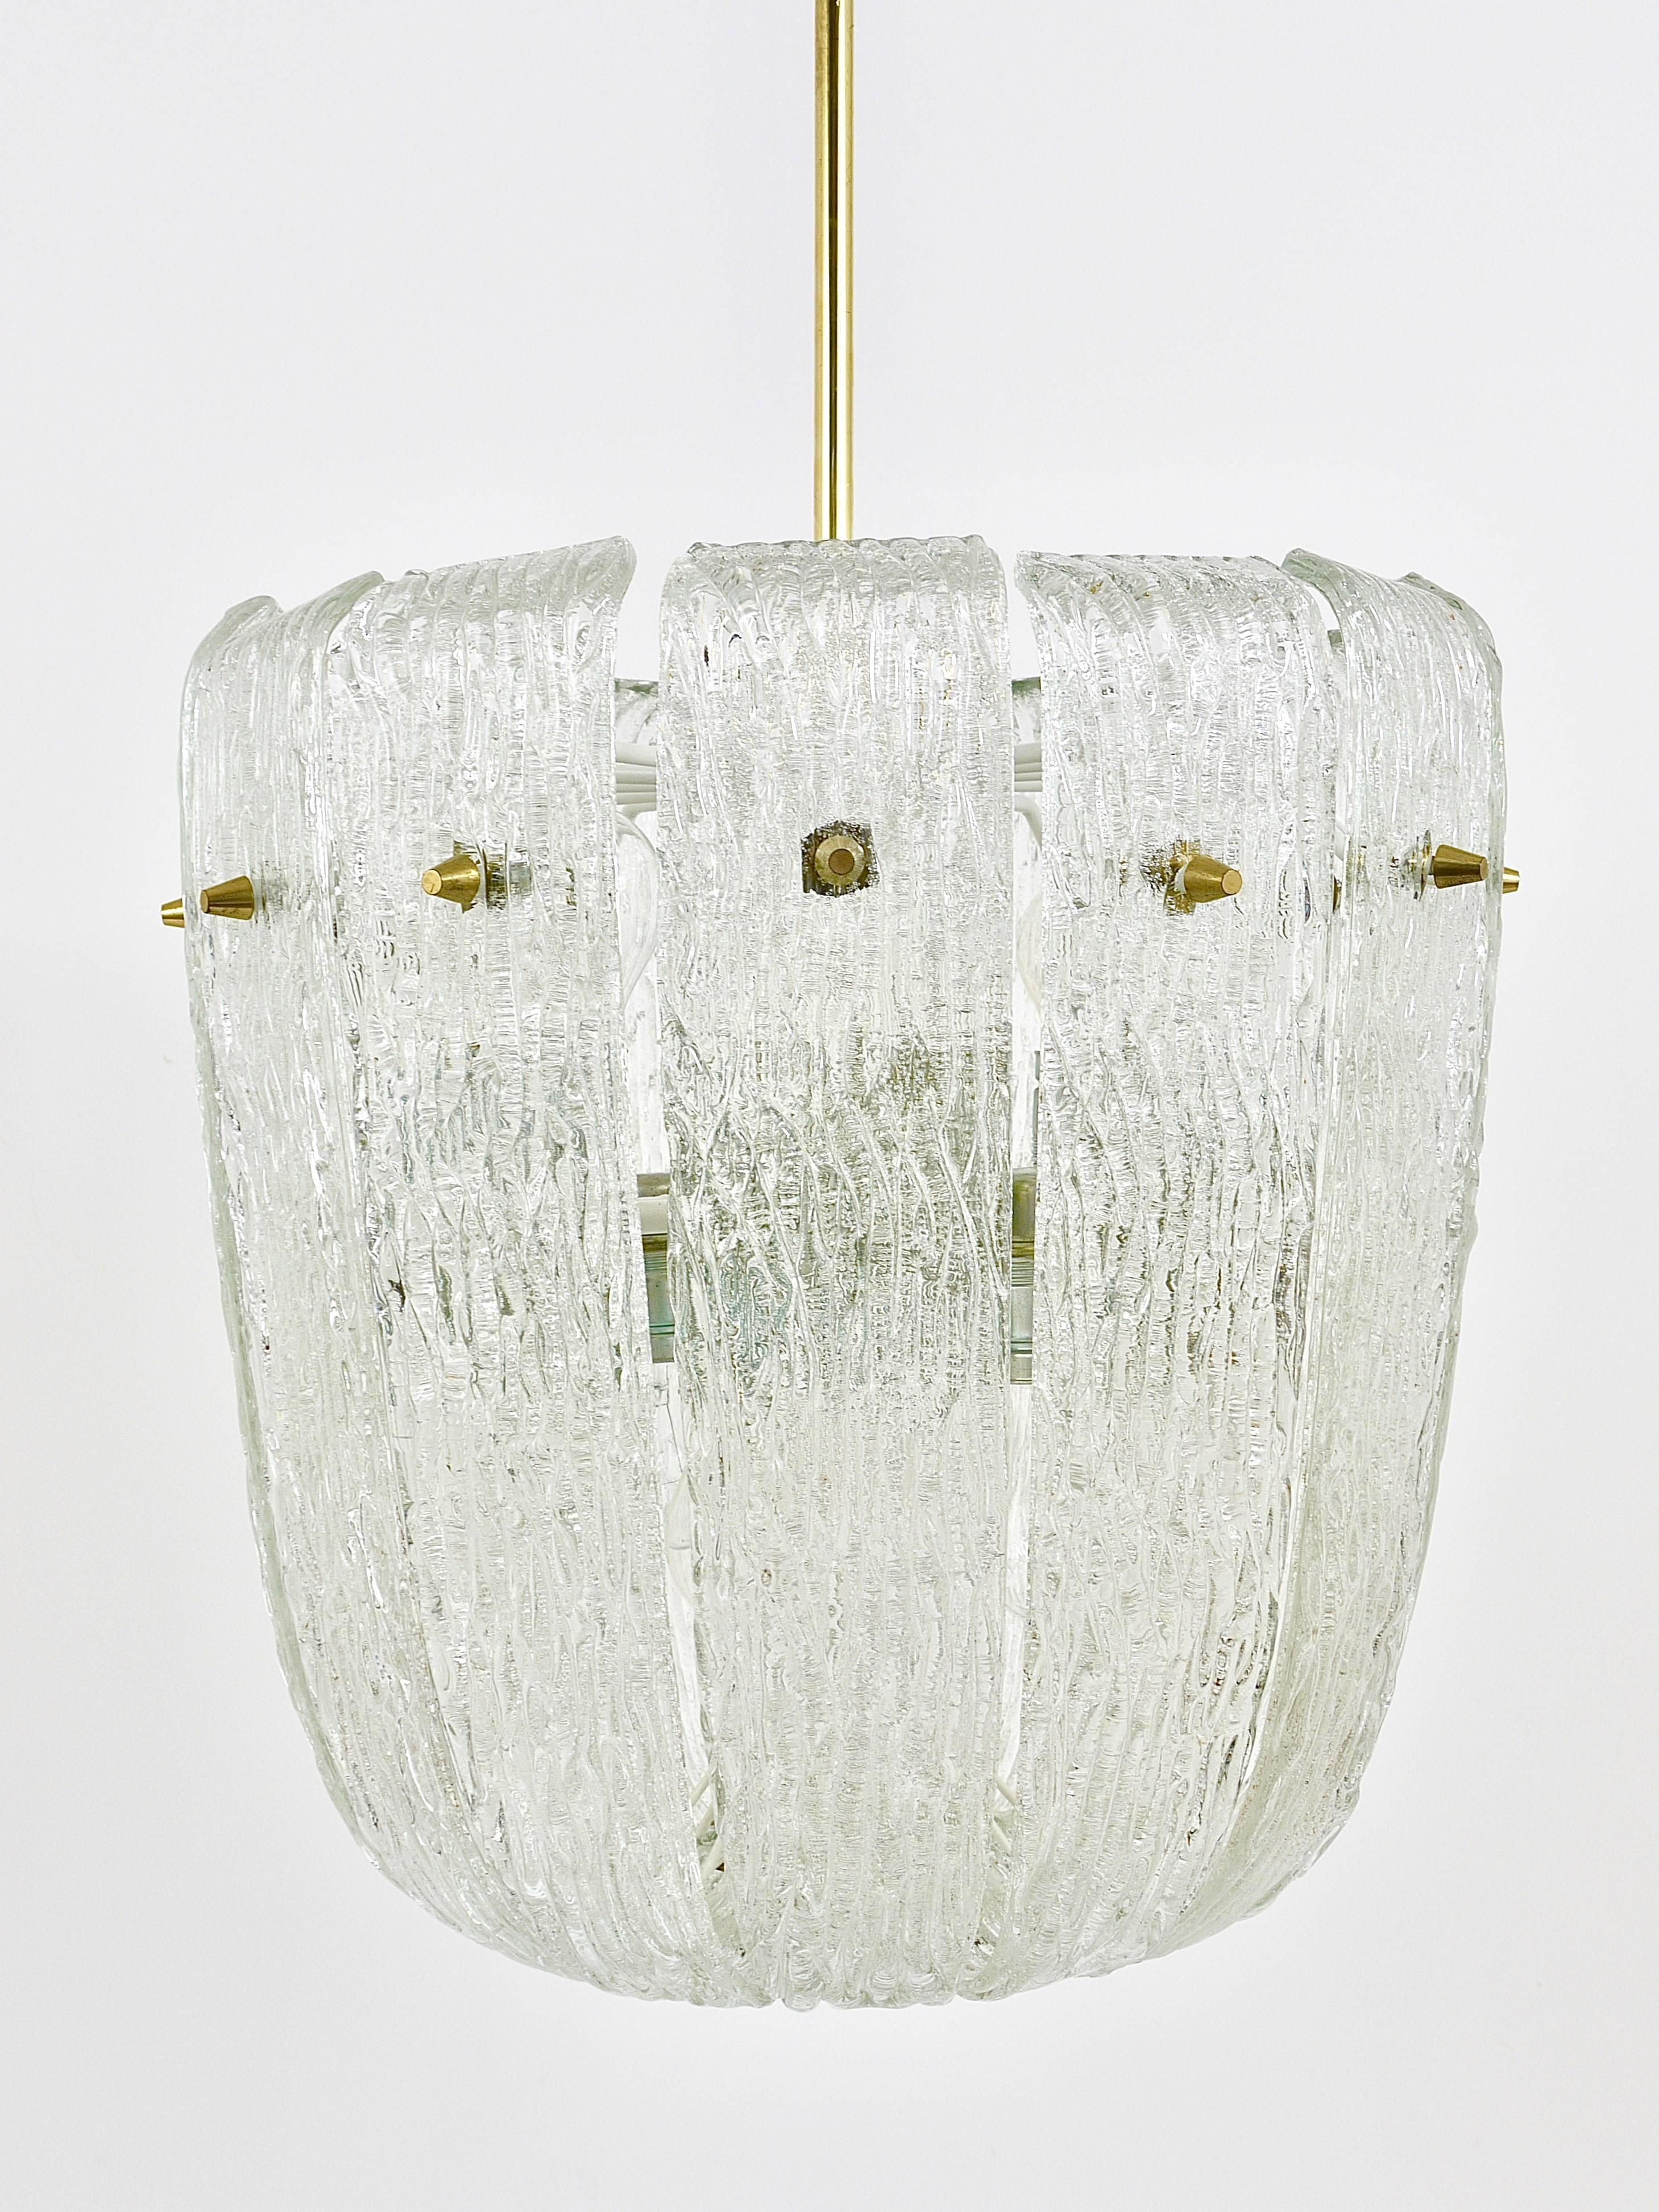 A beautiful Austrian modernist brass chandelier by Kalmar from the 1950s. Has lovely curved textured glasses, which remind of melting ice. The chandelier has 12 sockets and is in very good condition with marginal patina on the brass. 

Measures: